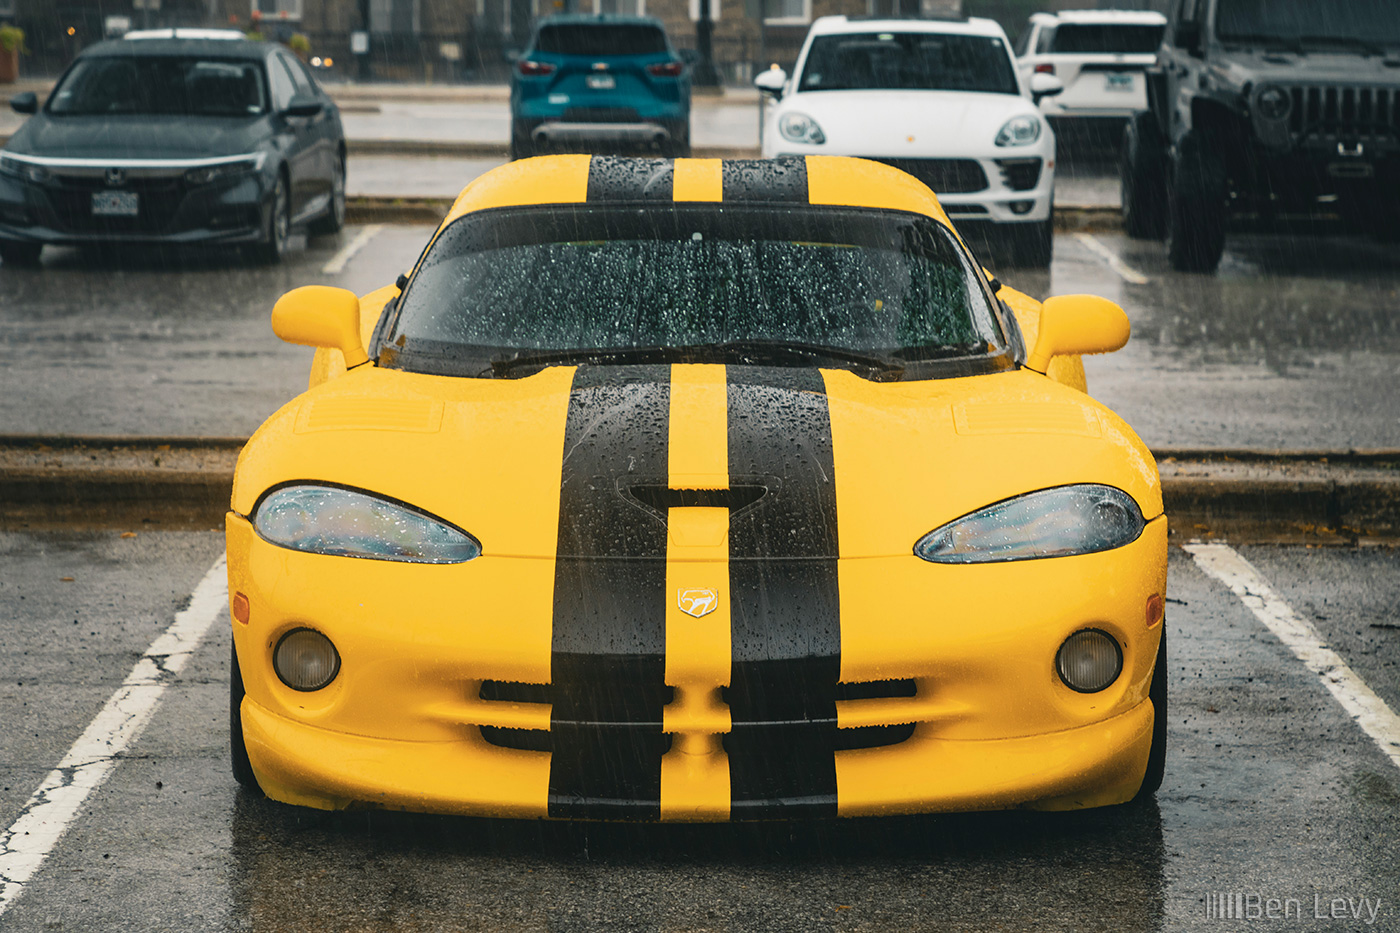 Front of Yellow Dodge Viper with Black Stripes